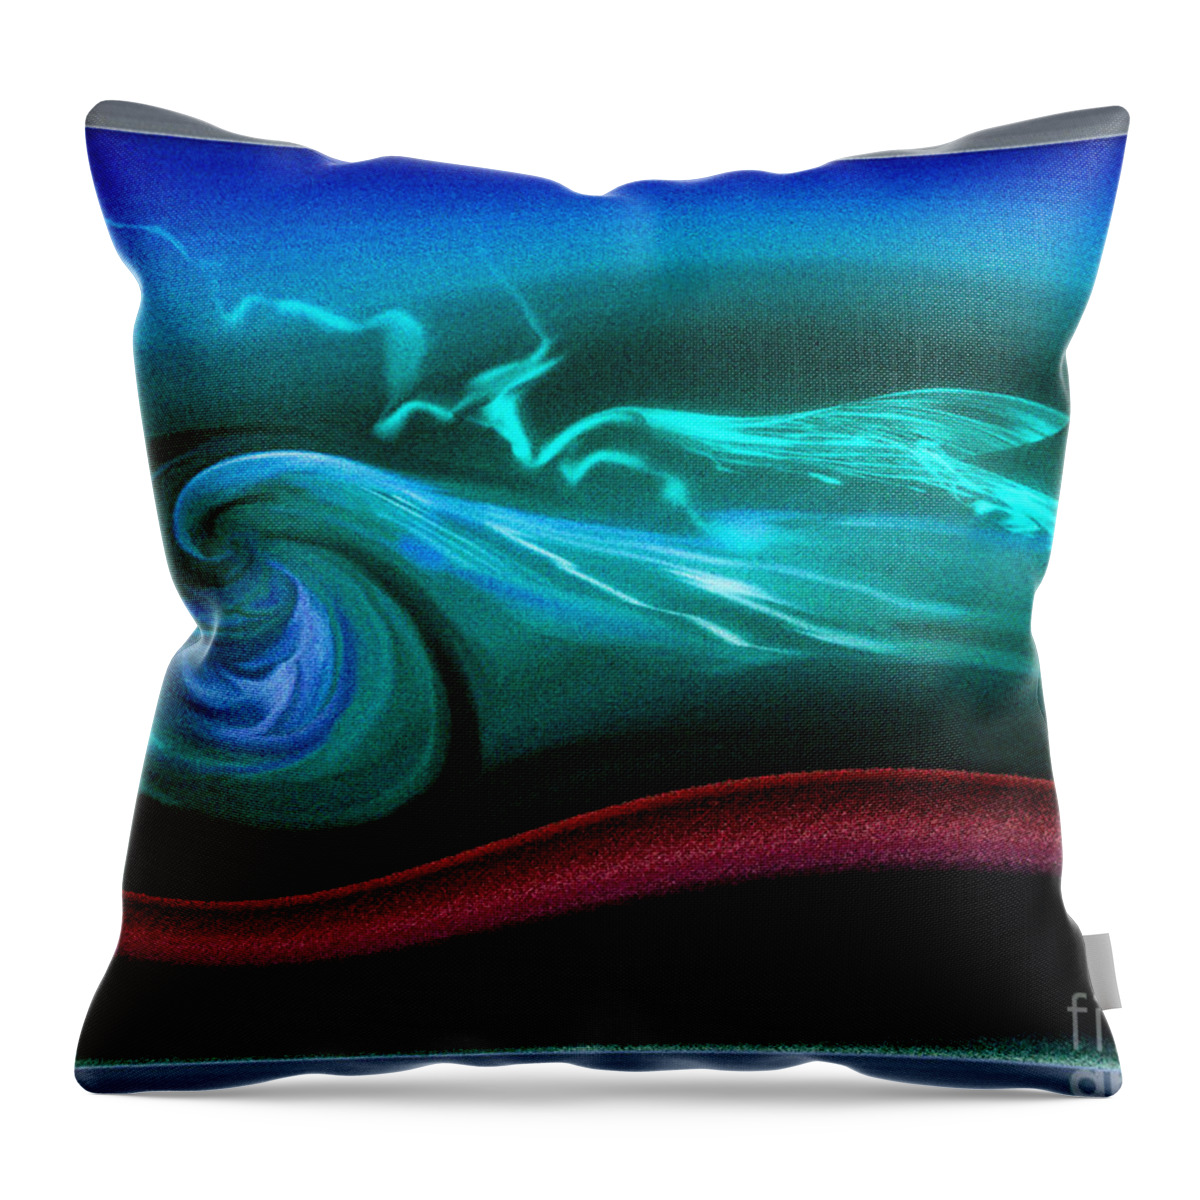 Consideration Throw Pillow featuring the digital art Consideration by Leo Symon